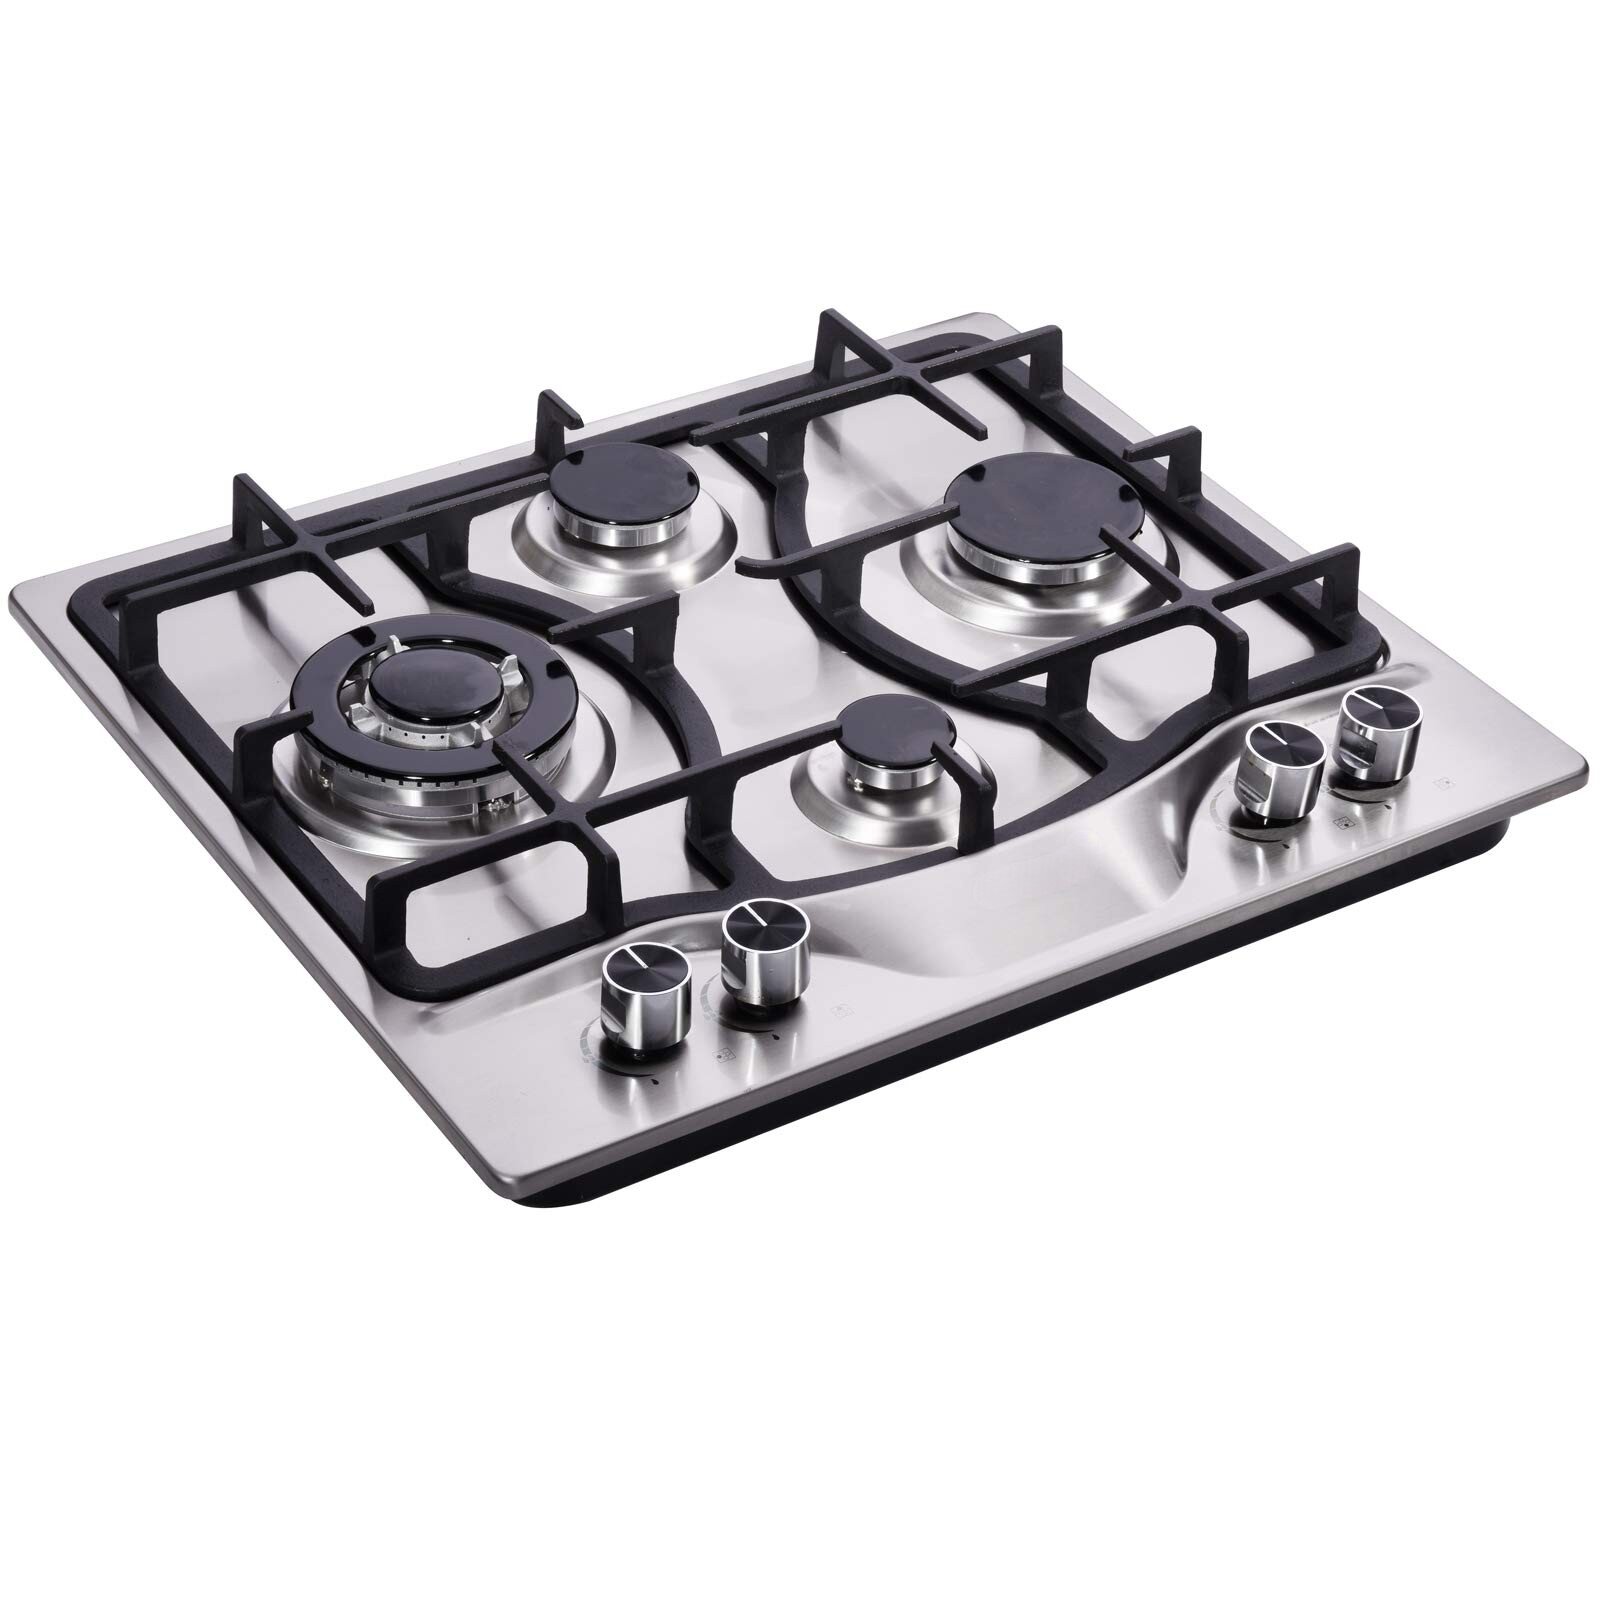 23Gas Stove,Cooktop Gas Cooktop with 4 Sealed Burners Stainless Steel Gas Stove Top with Thermocouple Protection 23 